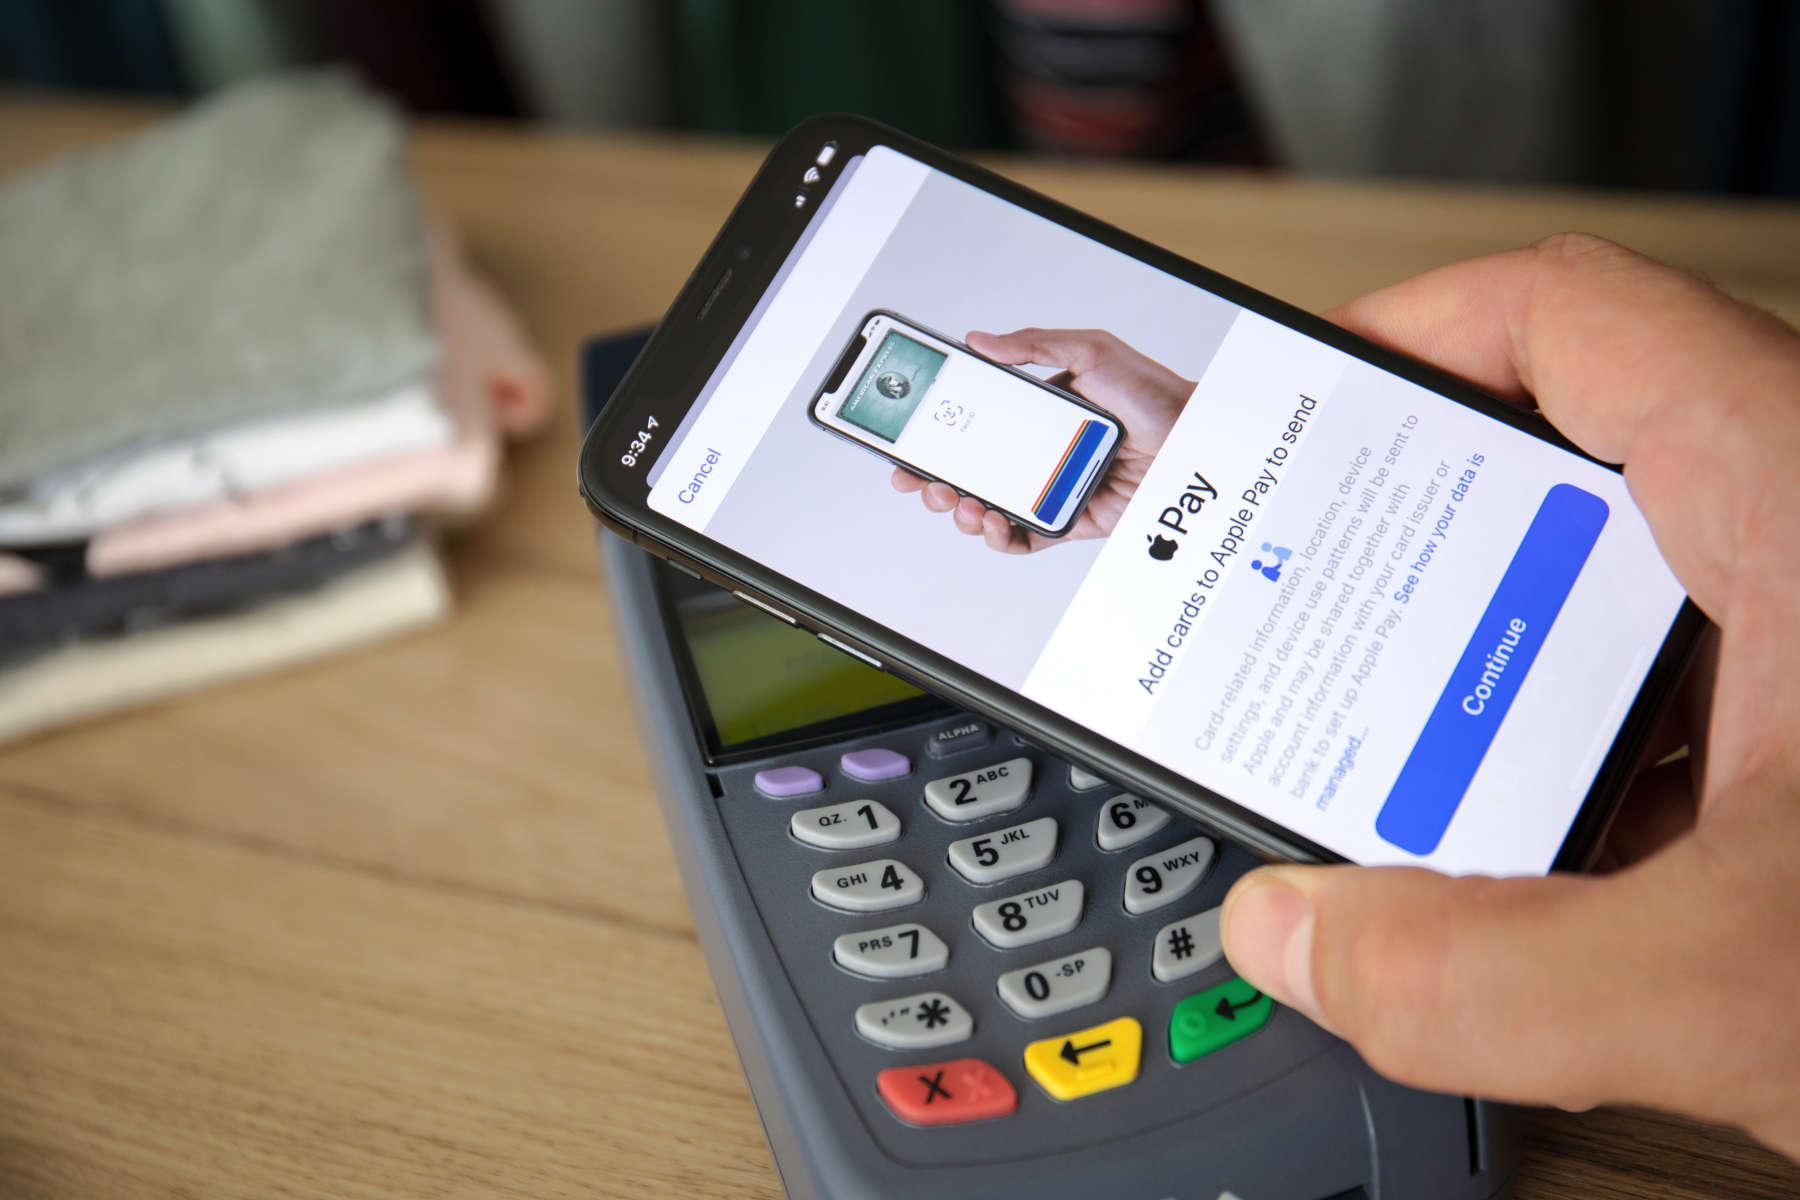 Stablecoin publisher Circle starts promising partnership with Apple Pay
